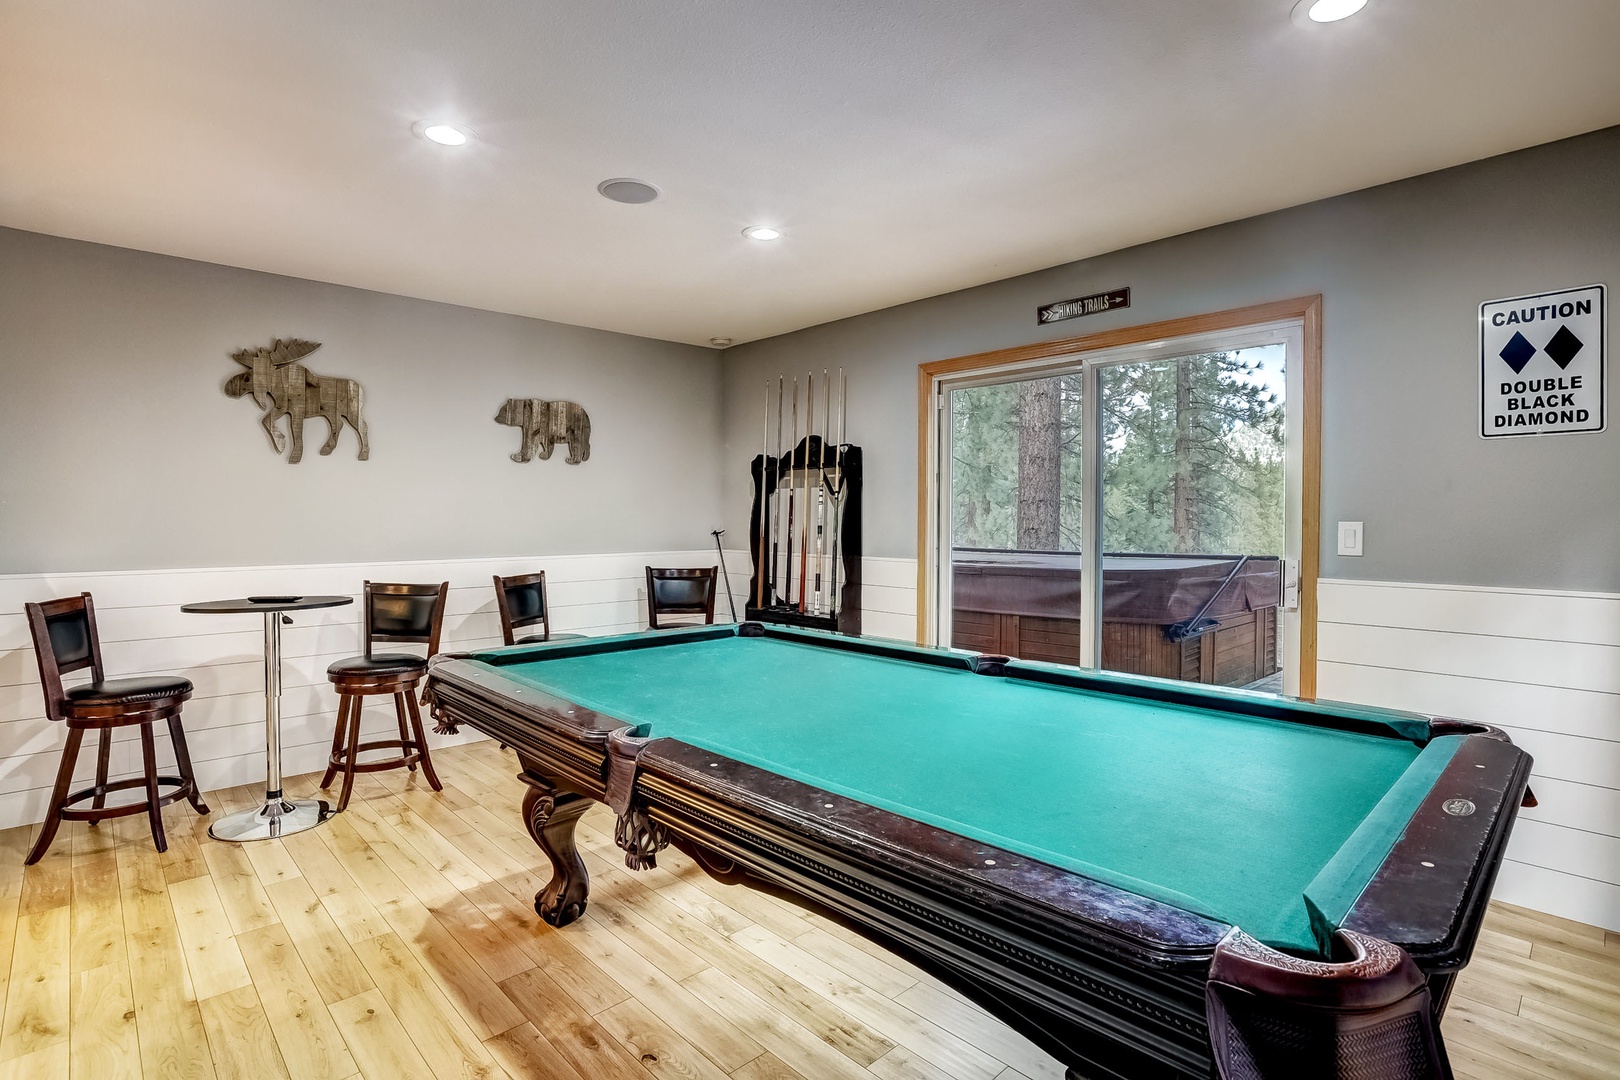 Game room with pool table, balcony access to hot tub